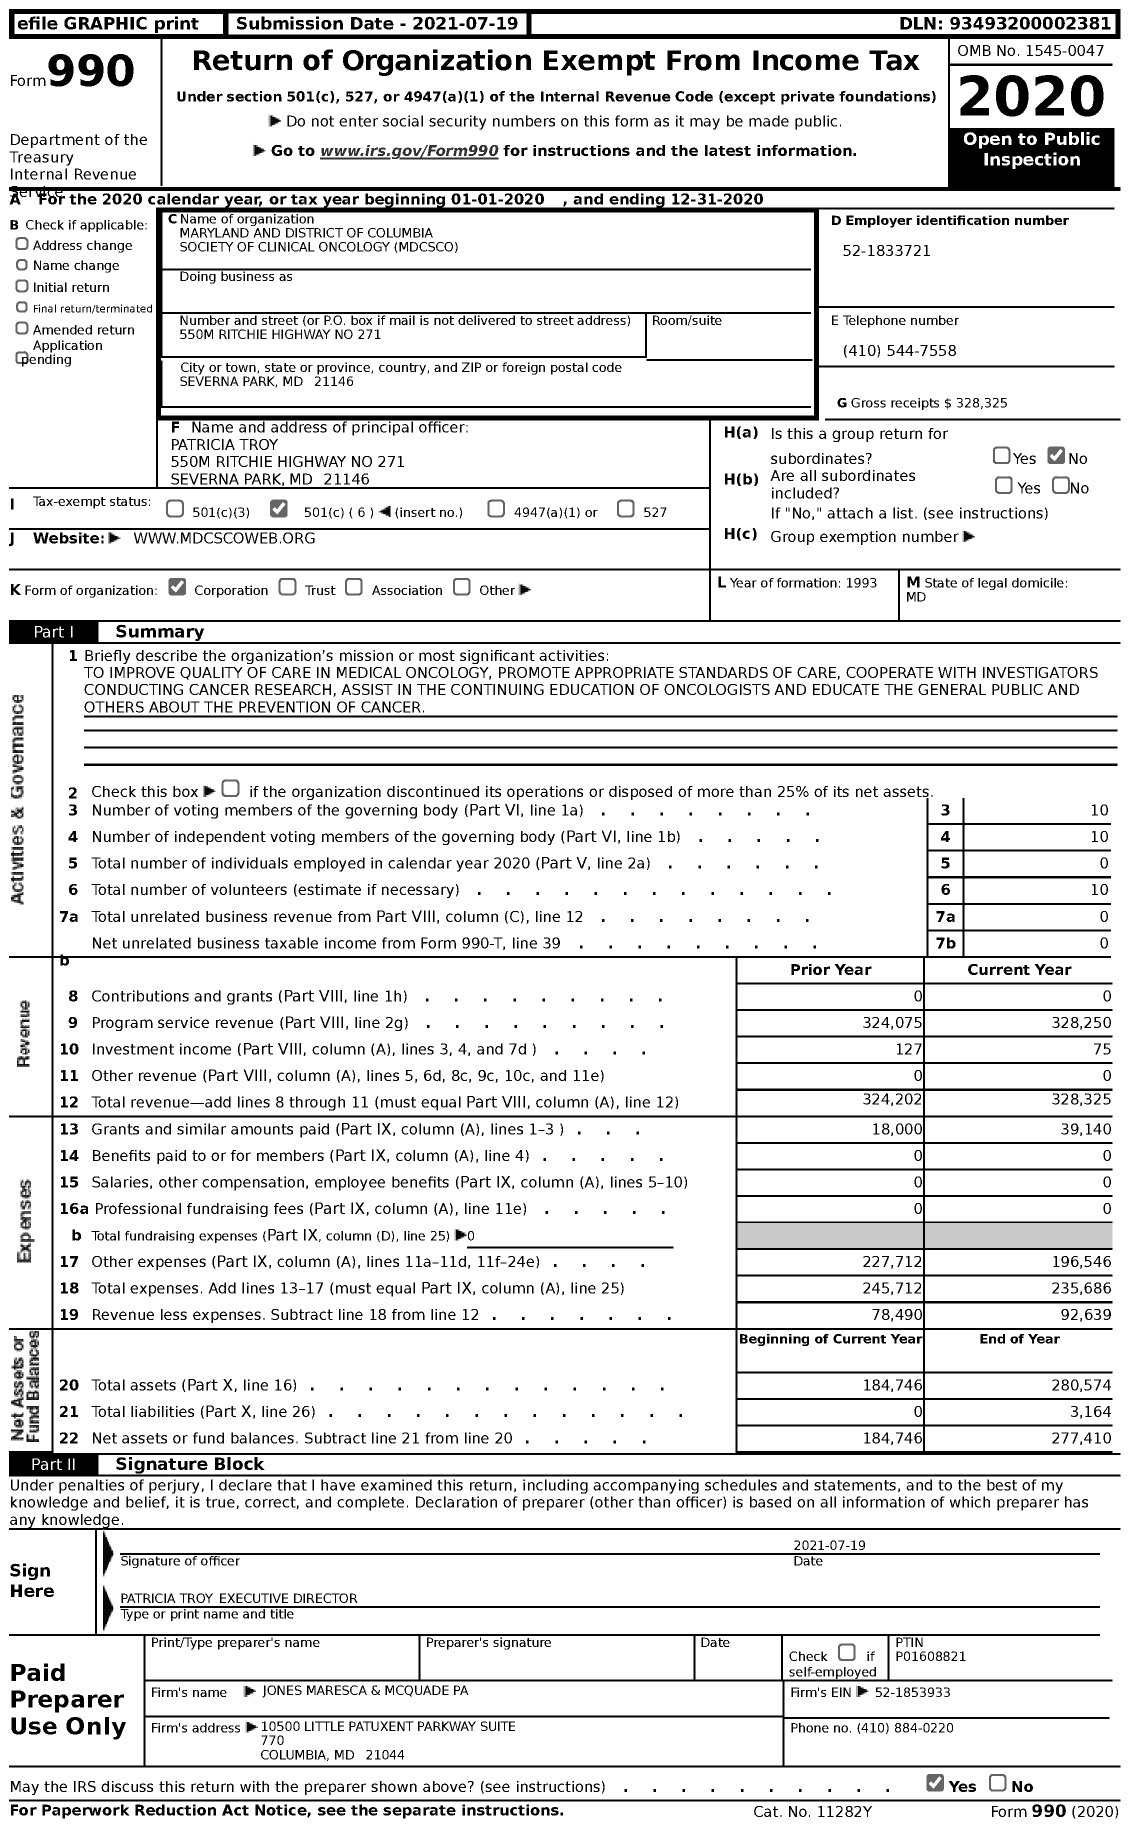 Image of first page of 2020 Form 990 for Maryland and District of Columbia Society of Clinical Oncology